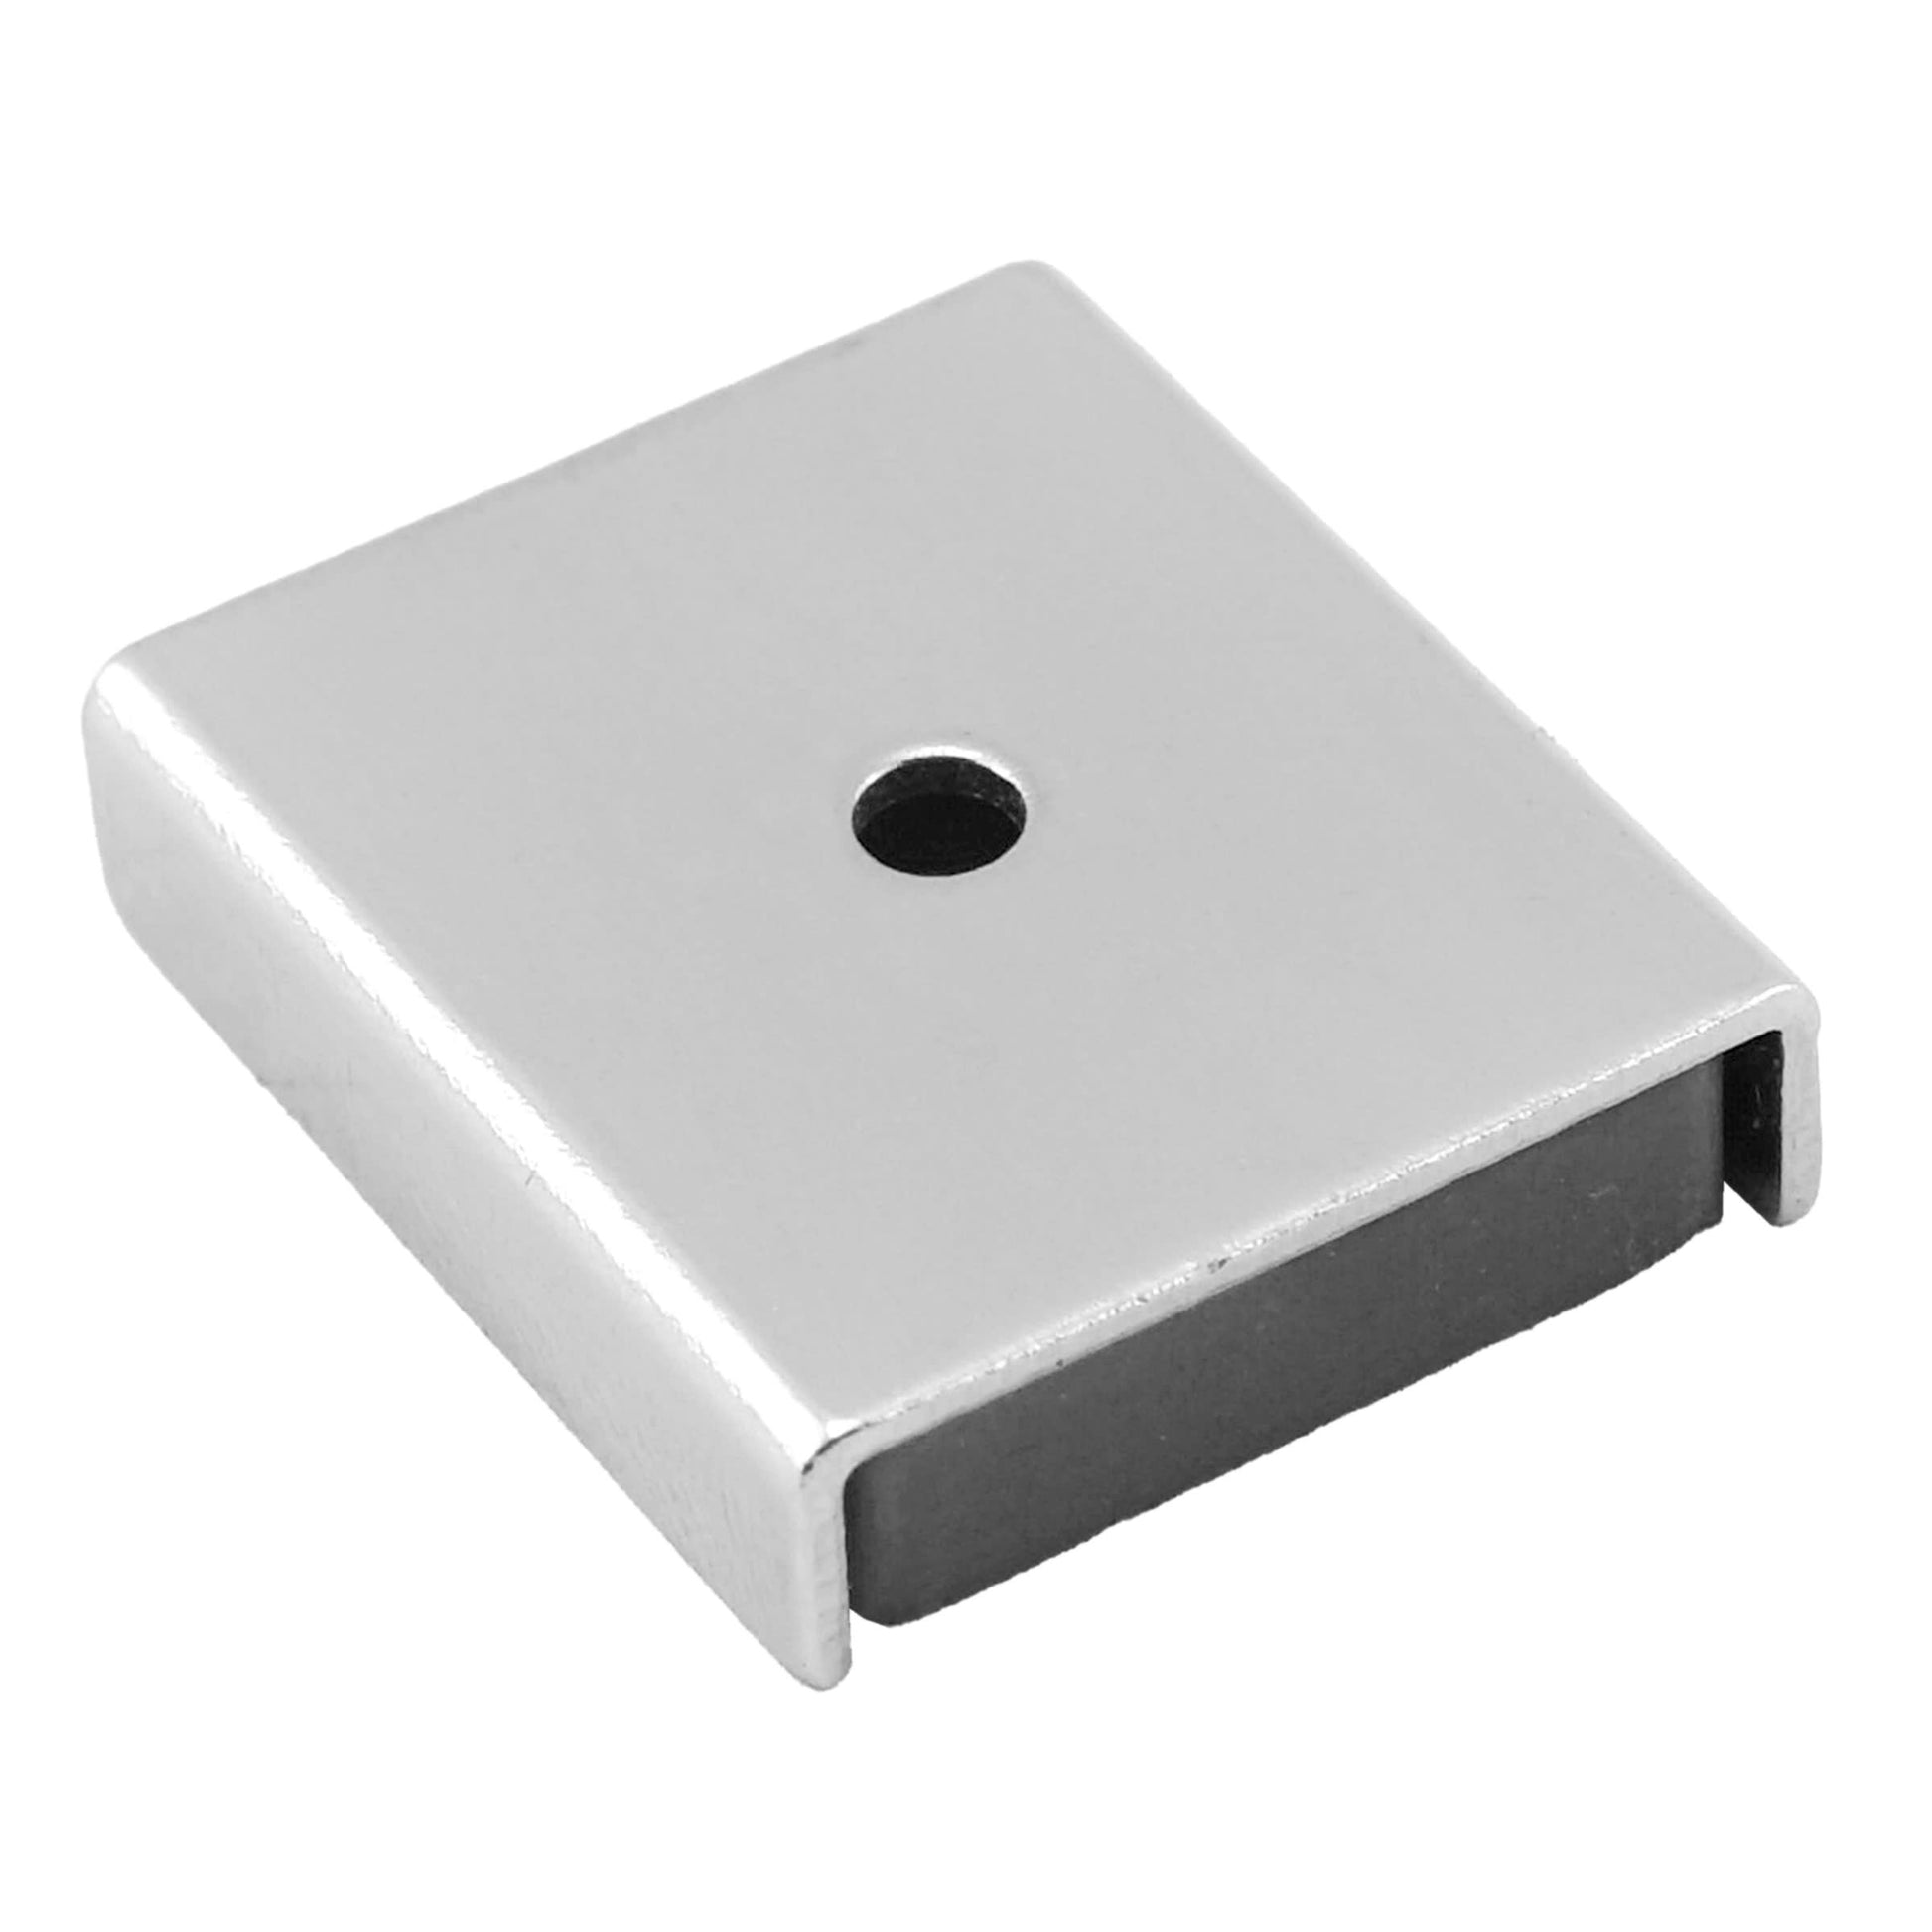 Load image into Gallery viewer, 07220 Ceramic Latch Magnet Channel Assemblies (2pk) - 45 Degree Angle View